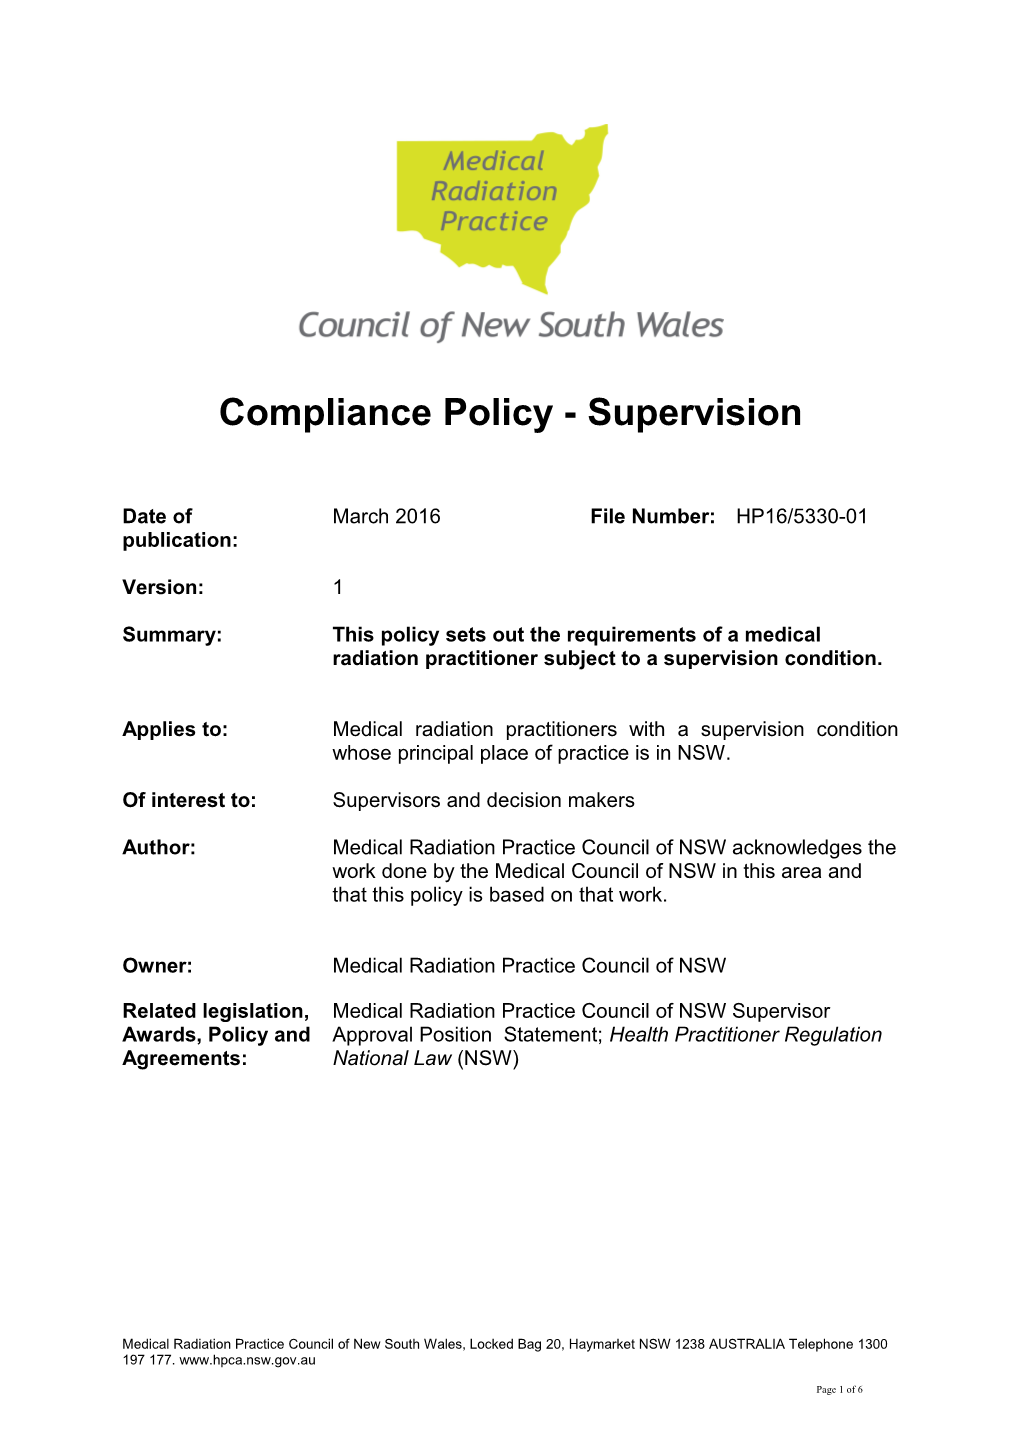 Compliance Policy - Supervision